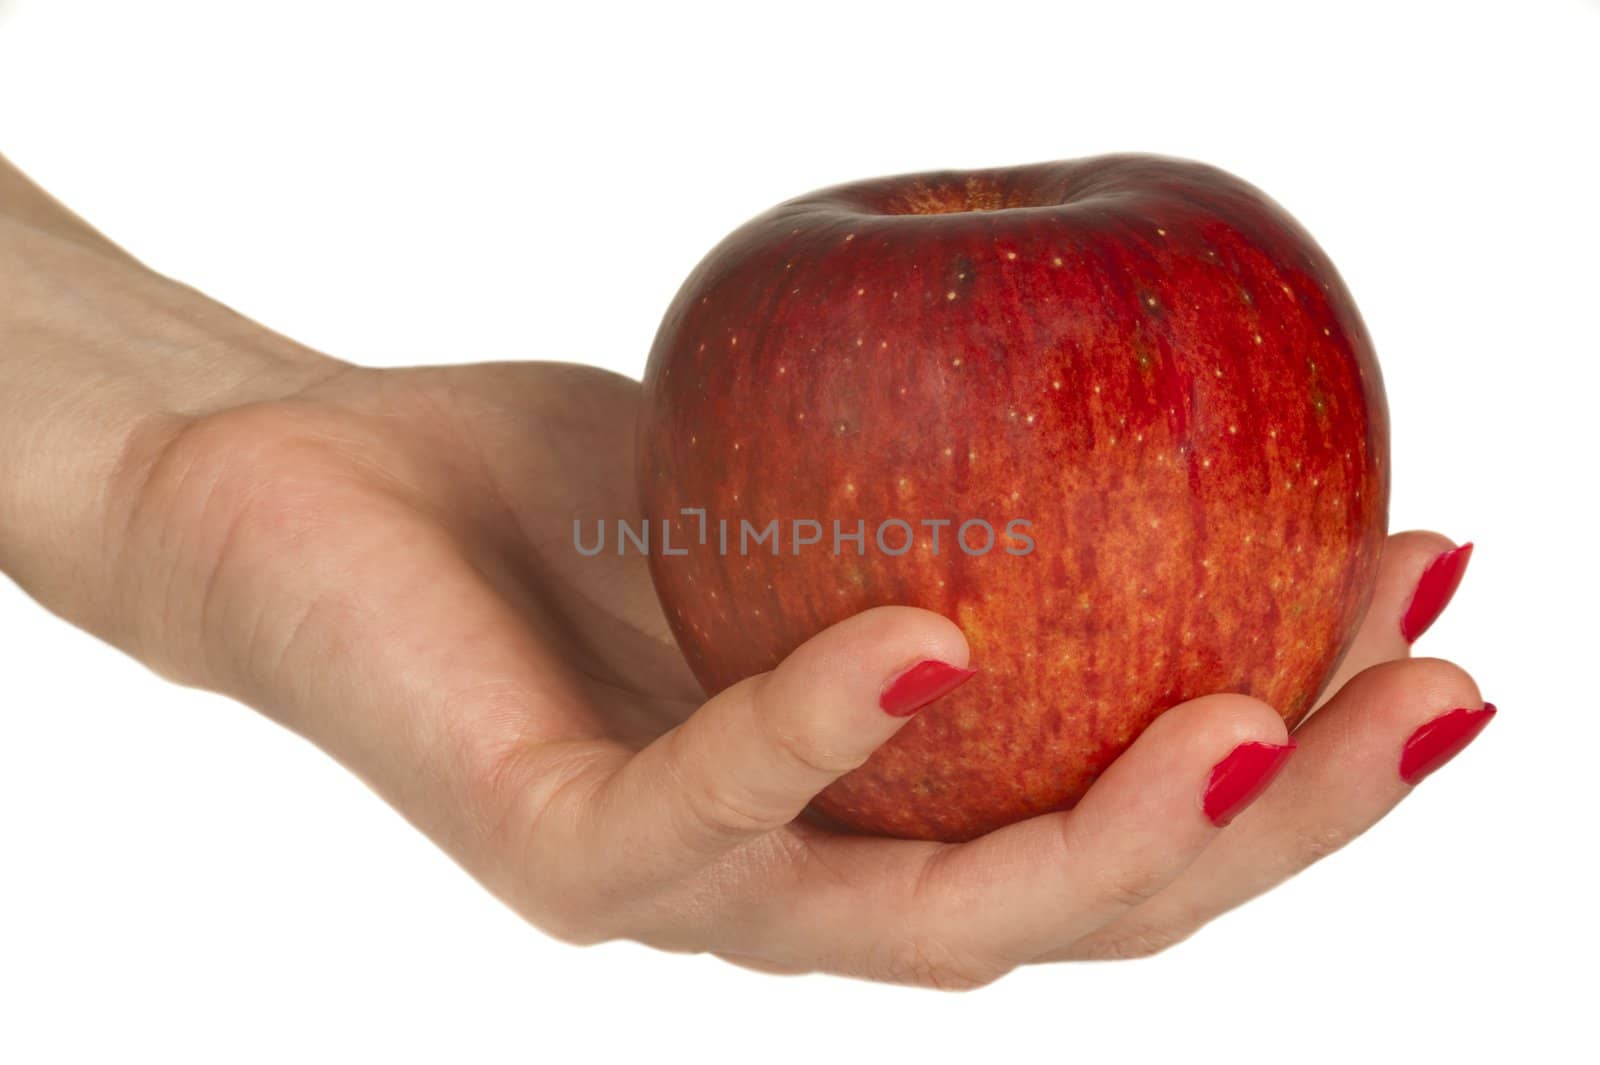 Isolated red apple in hand on white background by oguzdkn